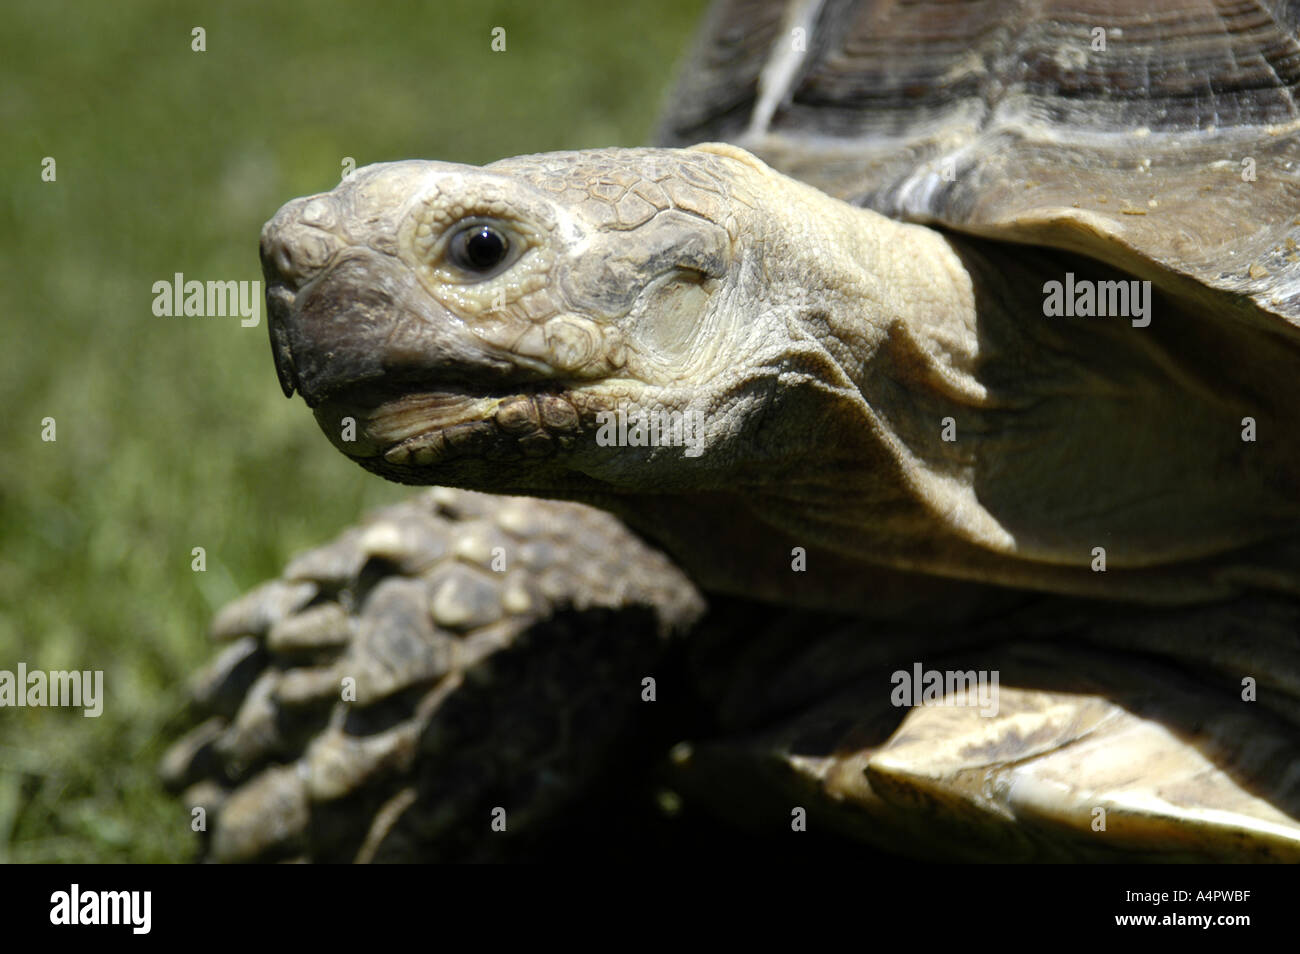 African spur thigh tortoise Stock Photo